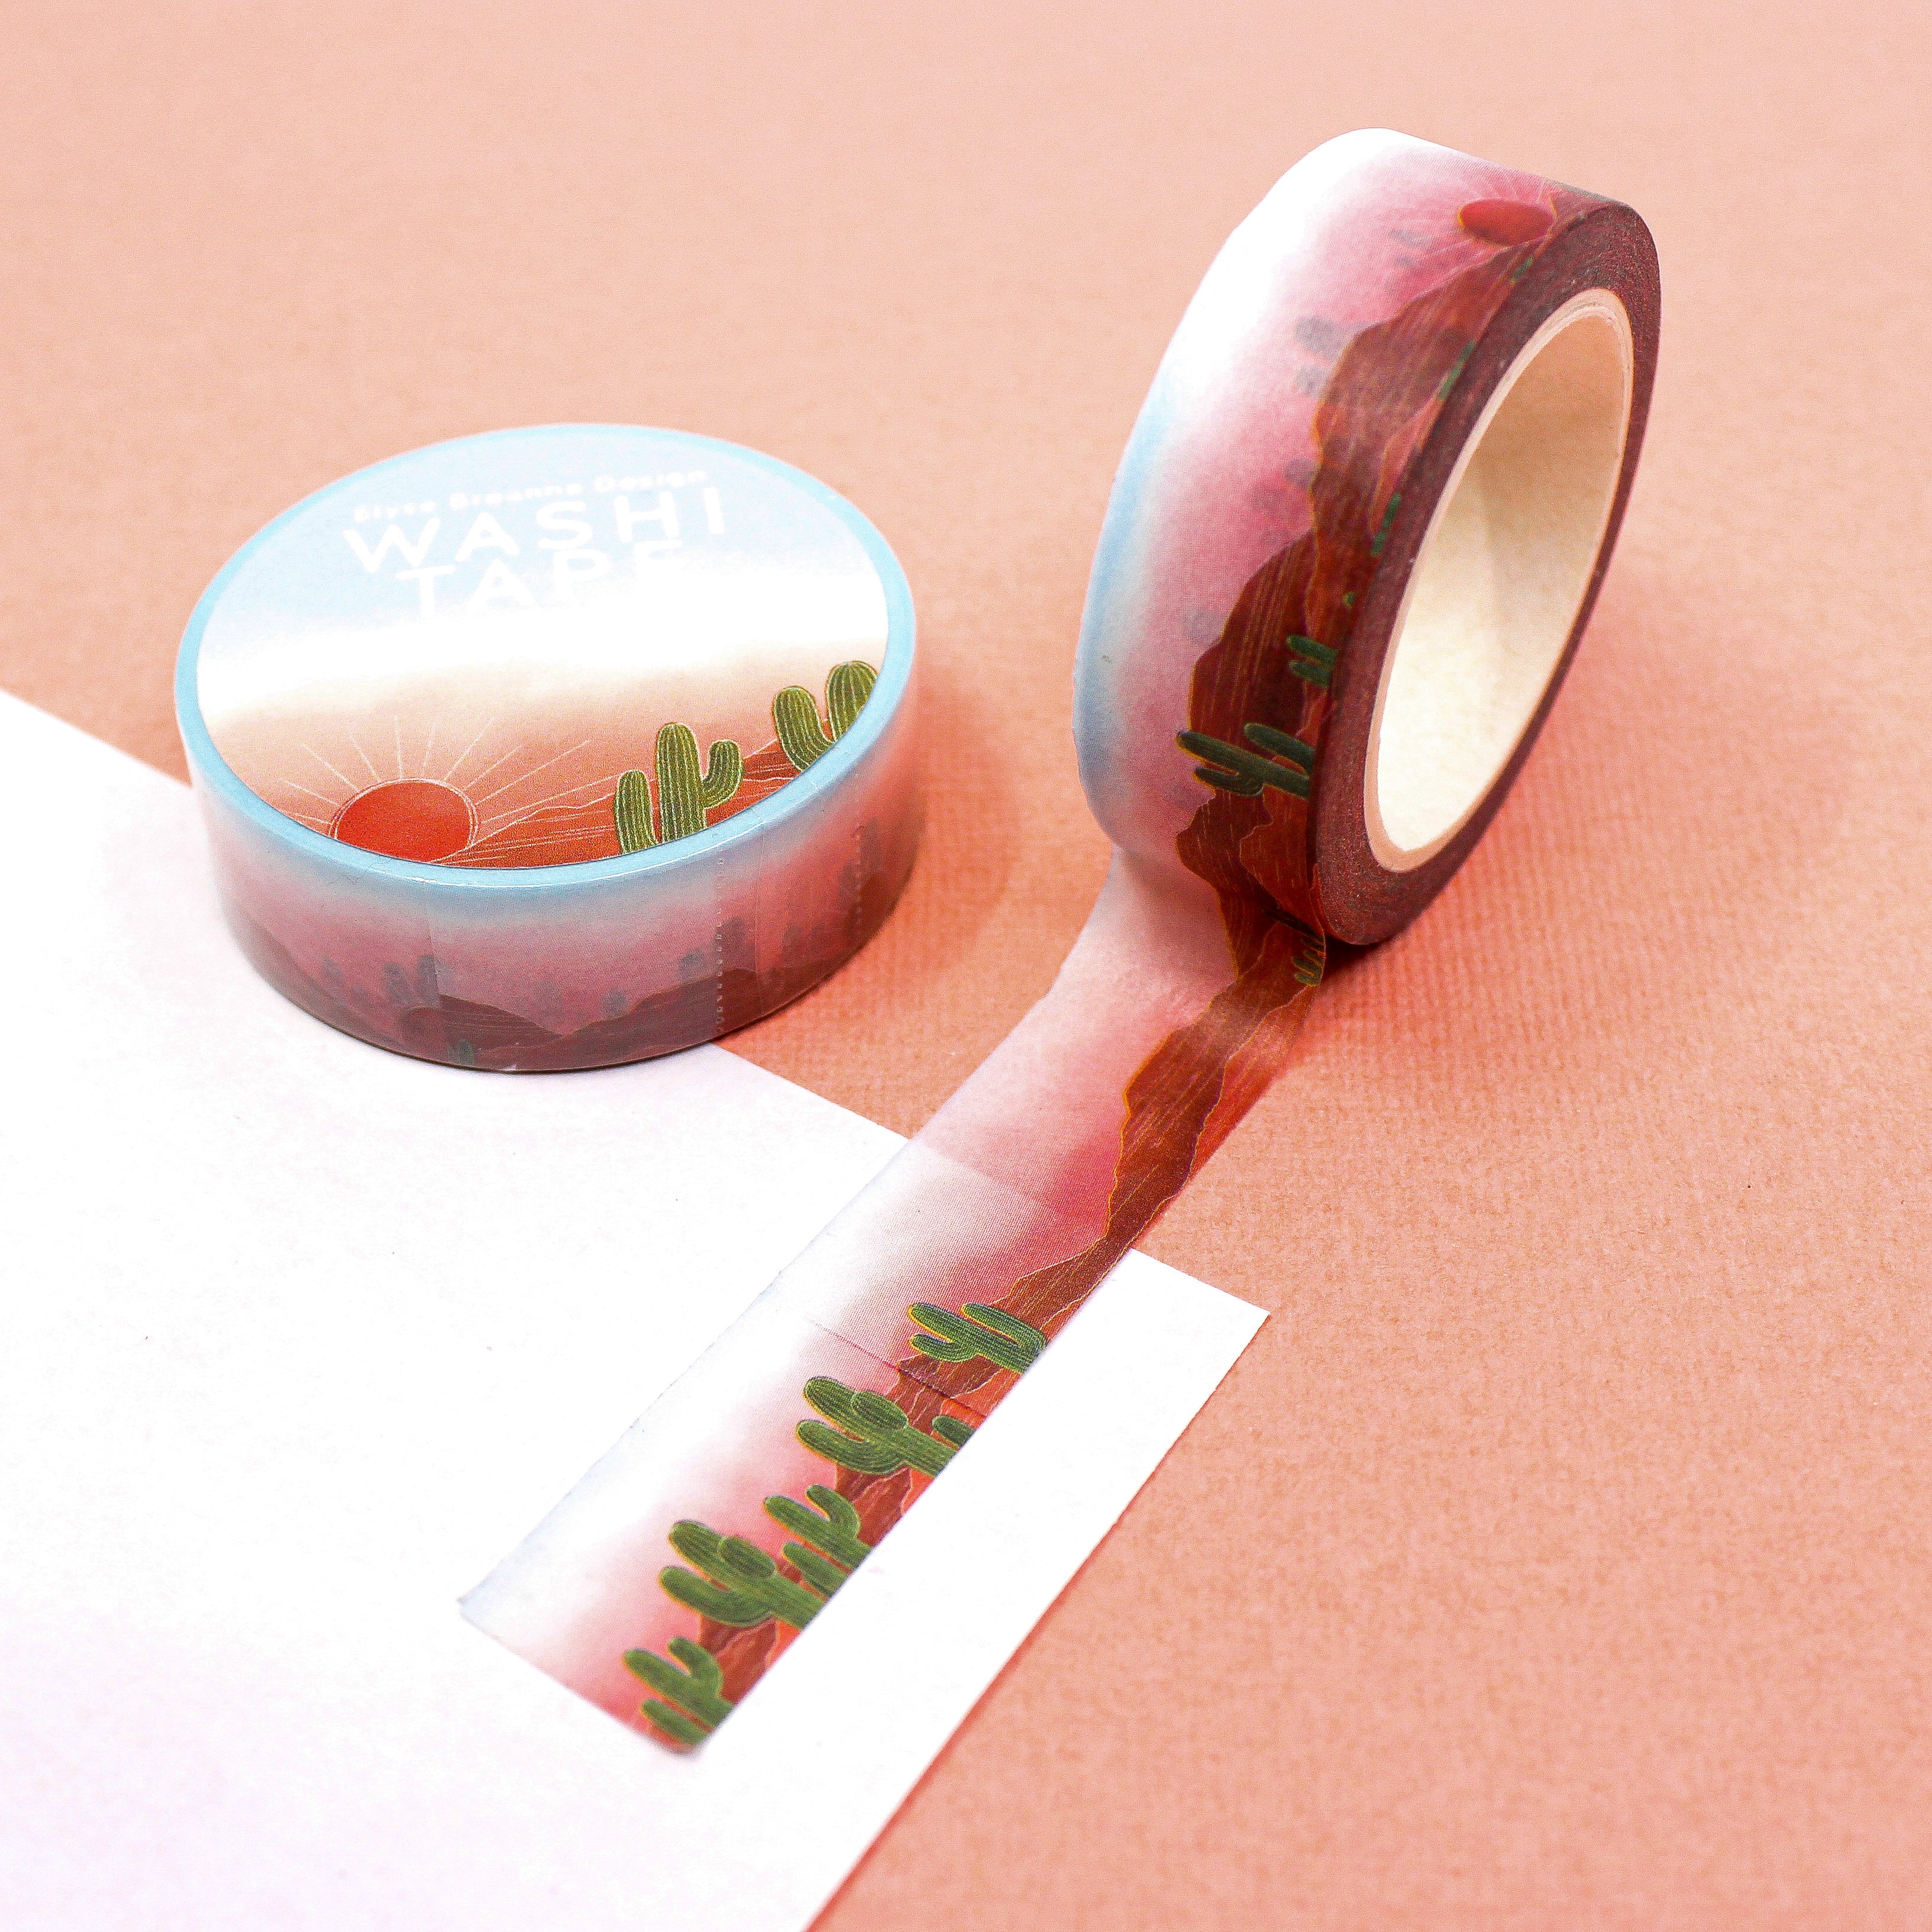 This is a desert landscape themed washi tape from BBB Supplies Craft Shop